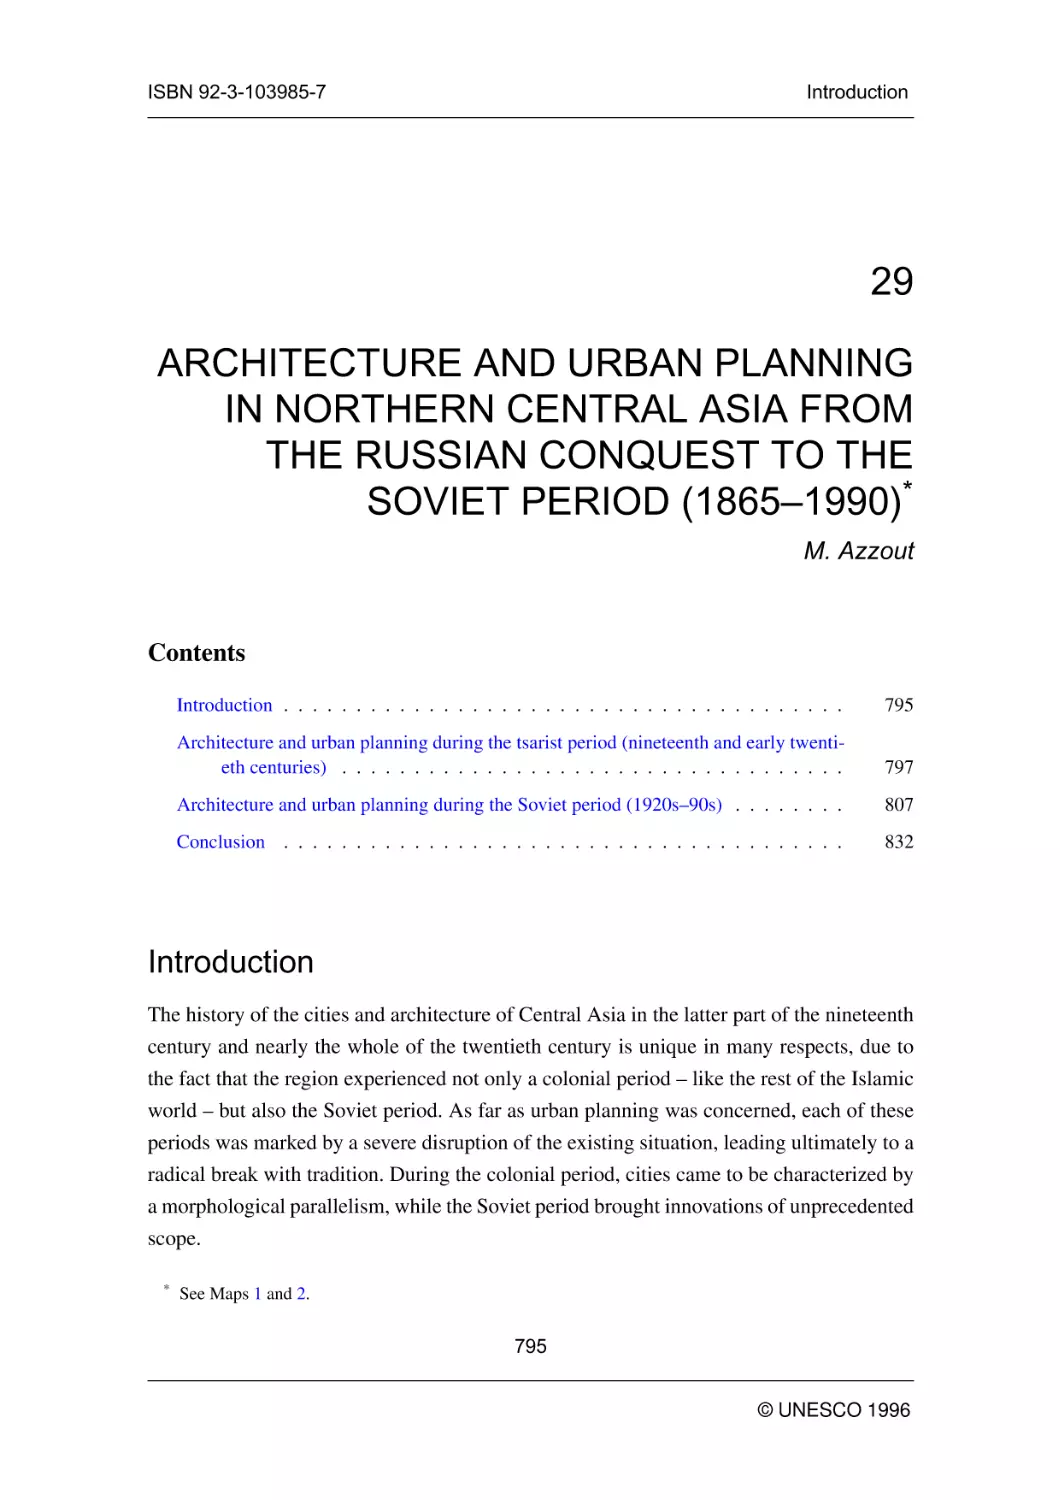 ARCHITECTURE AND URBAN PLANNING IN NORTHERN CENTRAL ASIA FROM THE RUSSIAN CONQUEST TO THE SOVIET PERIOD (1865--1990)